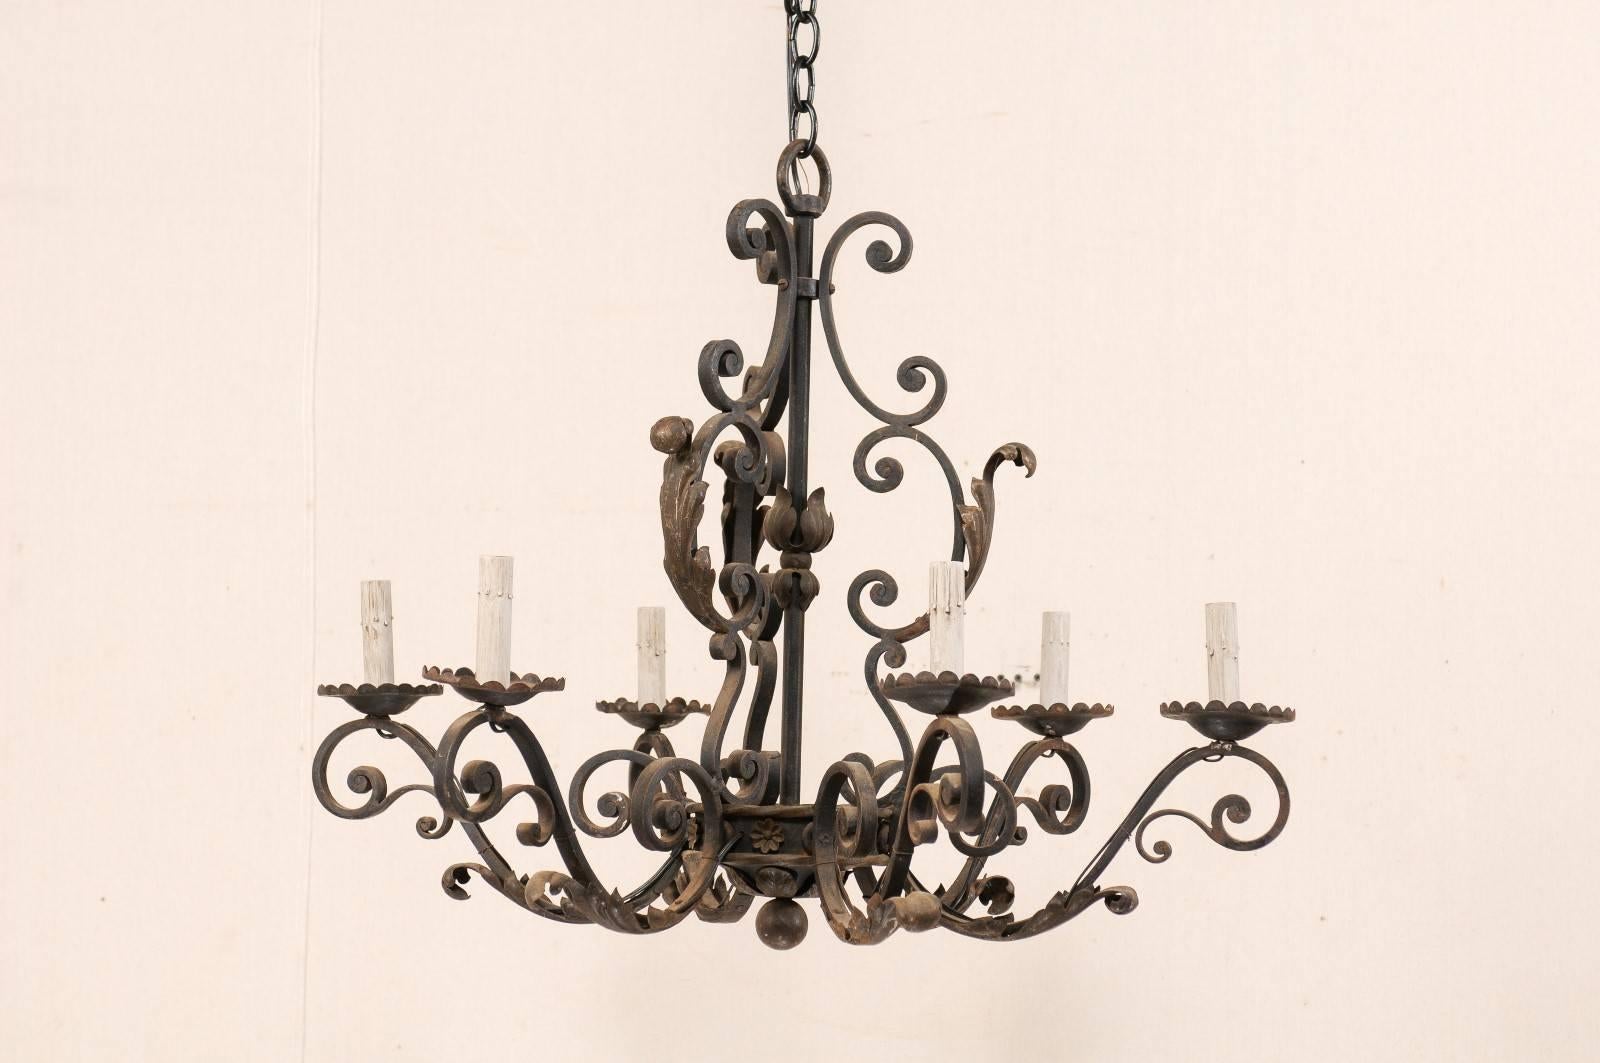 Forged French Mid-20th Century Scrolled Iron Chandelier with Six Lights